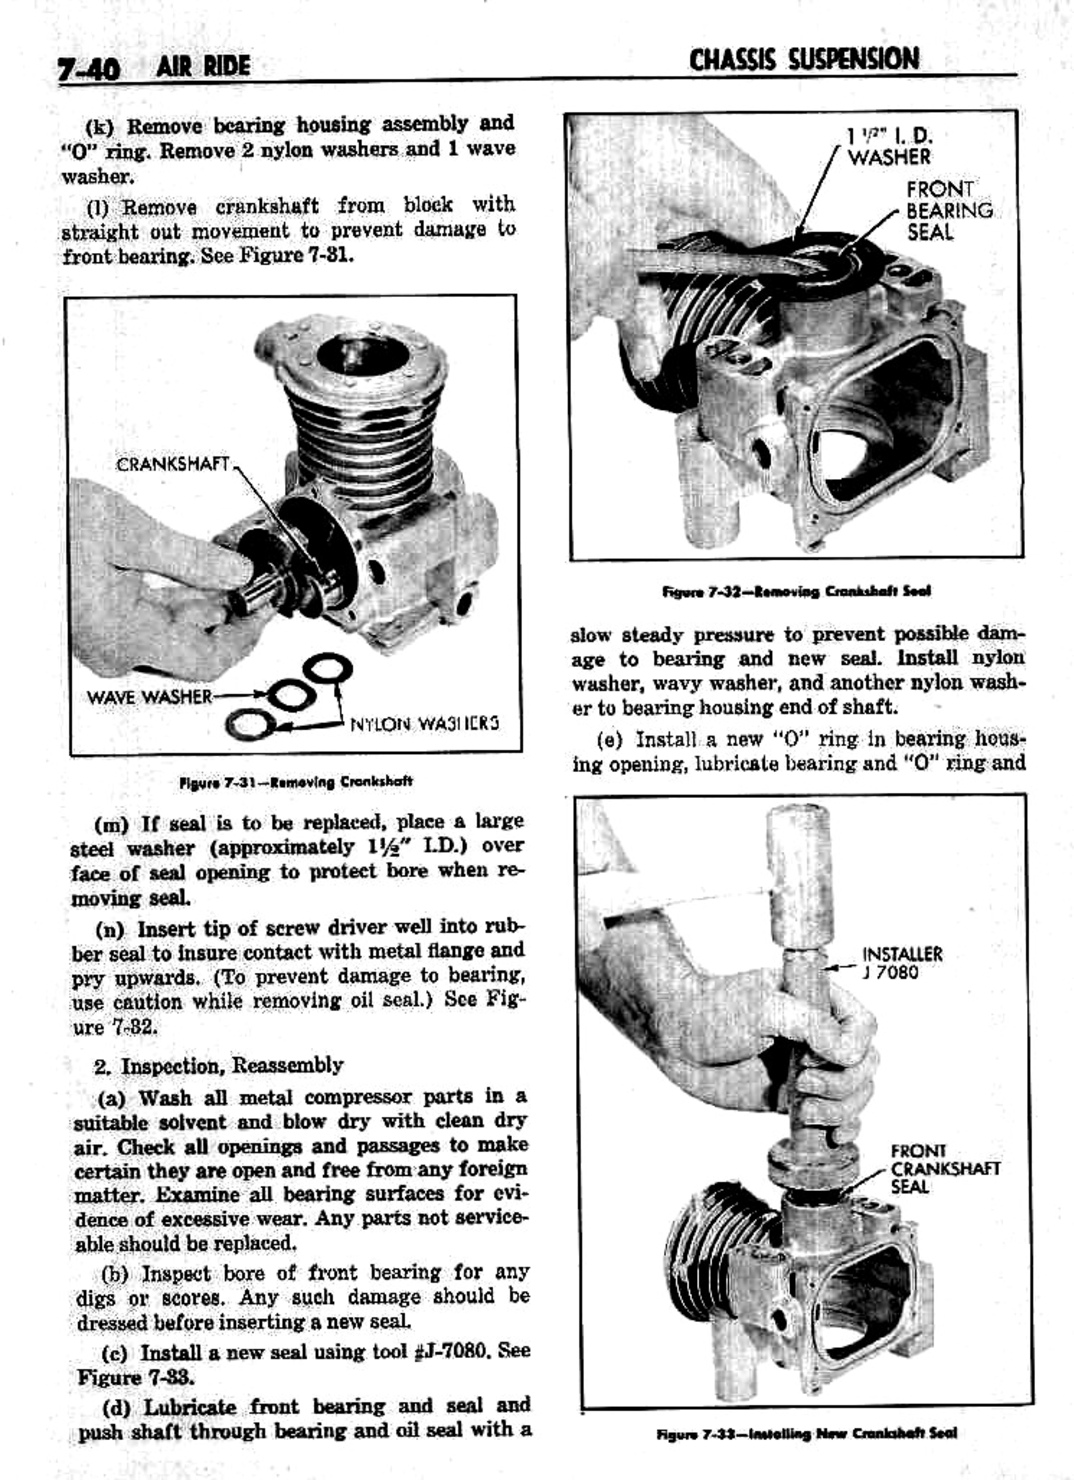 n_08 1959 Buick Shop Manual - Chassis Suspension-040-040.jpg